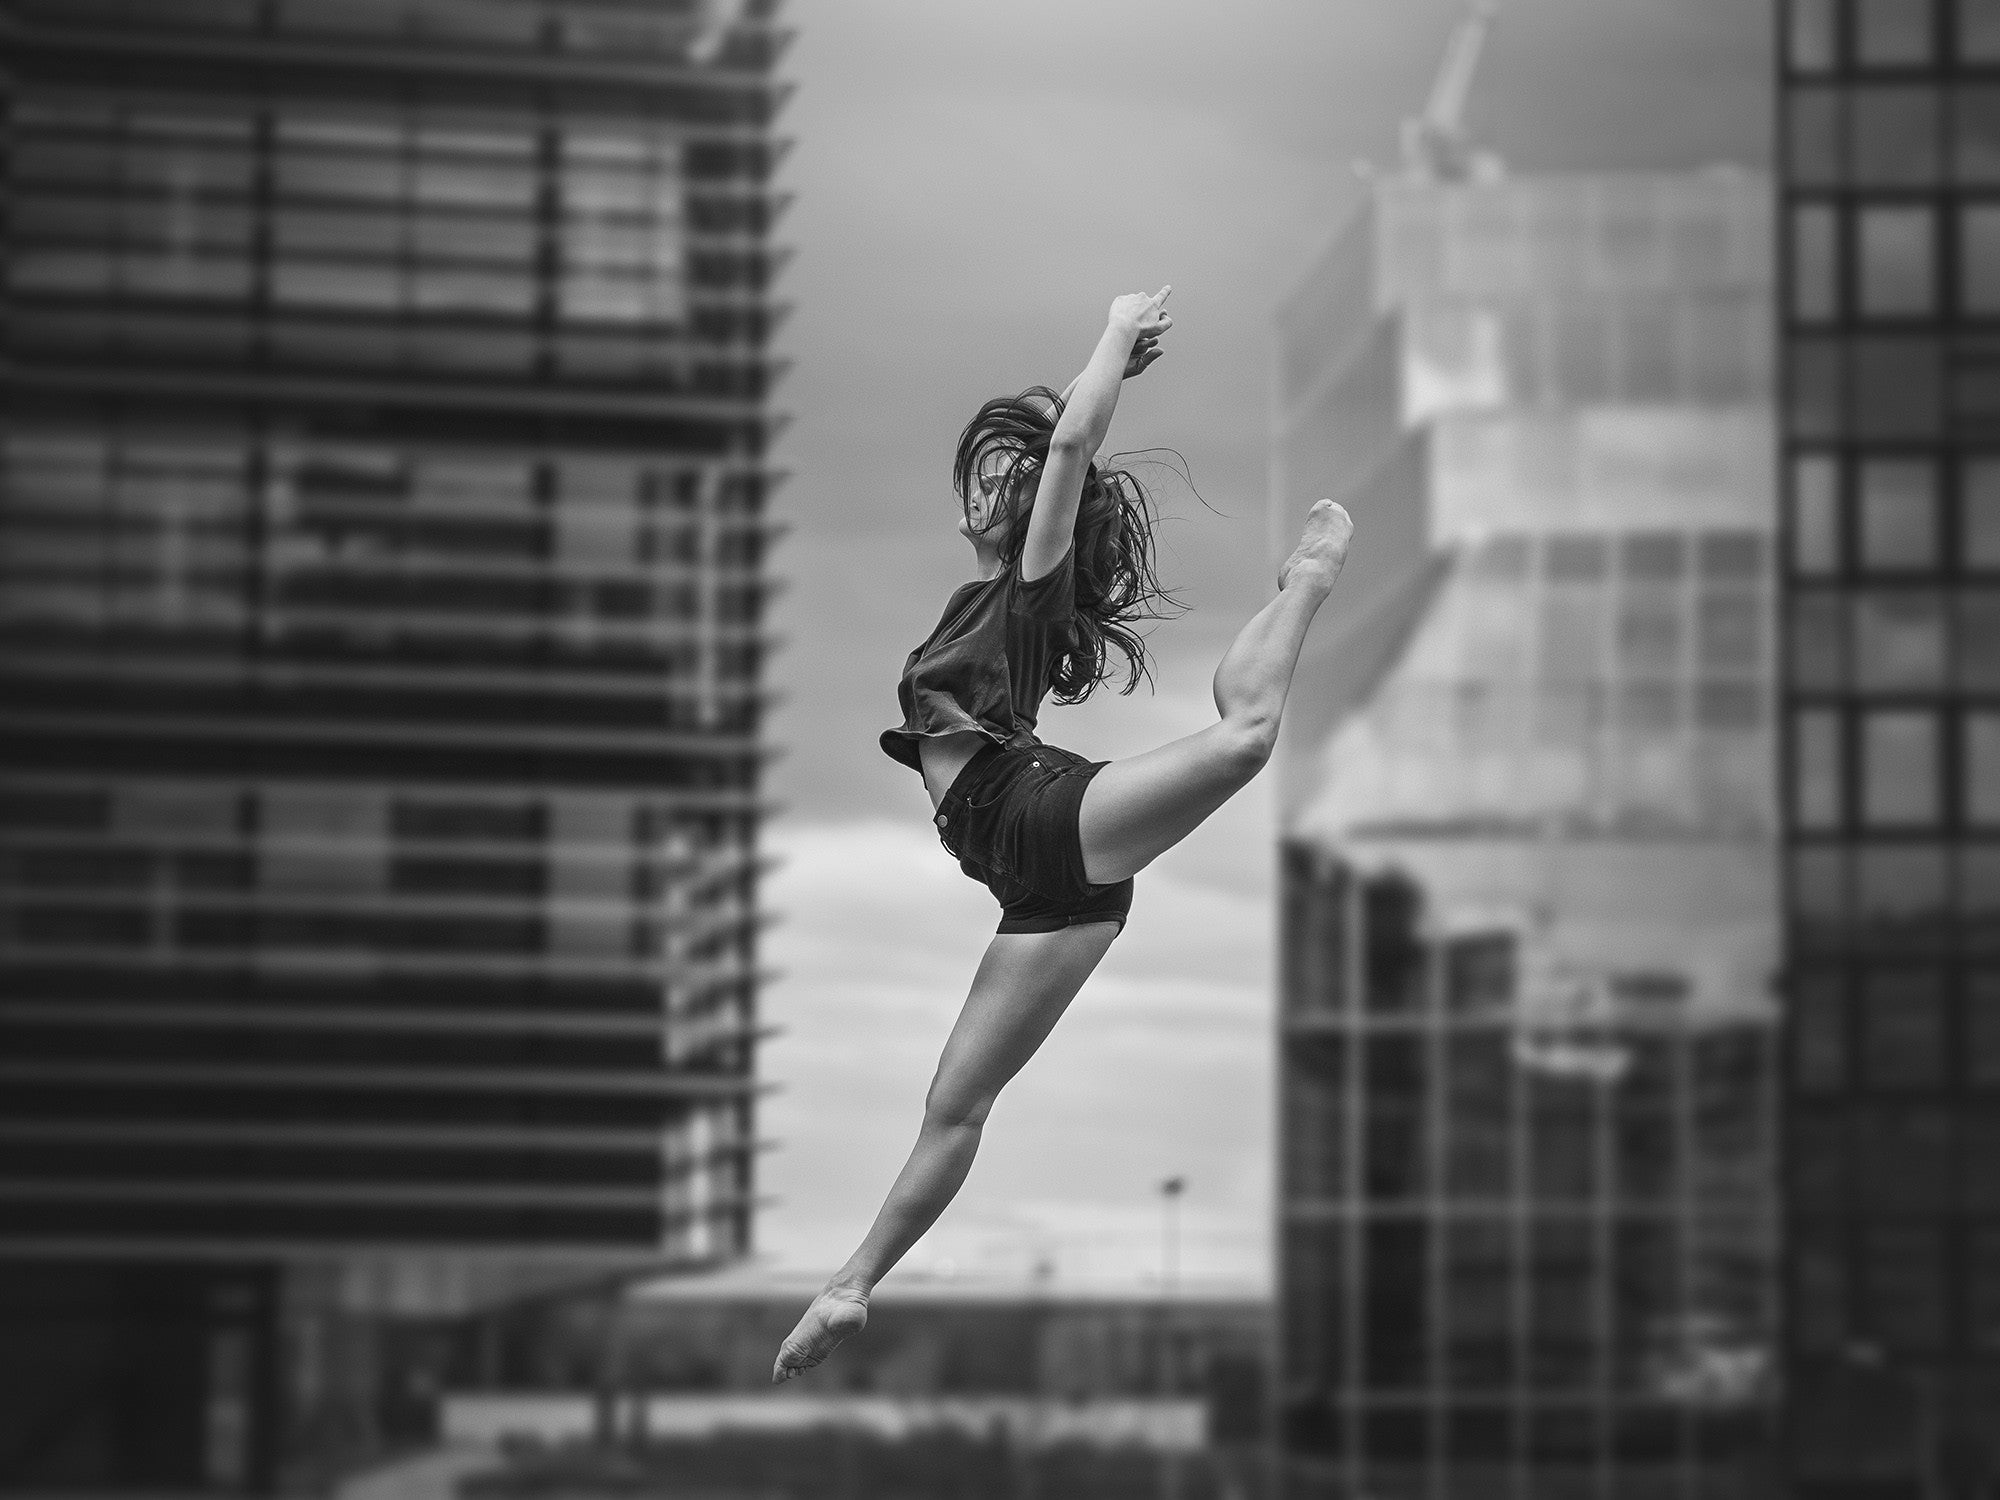 Art Dance Photography Prints - Purchase Online the artwork: In the air 3.0 by Dimitry Roulland